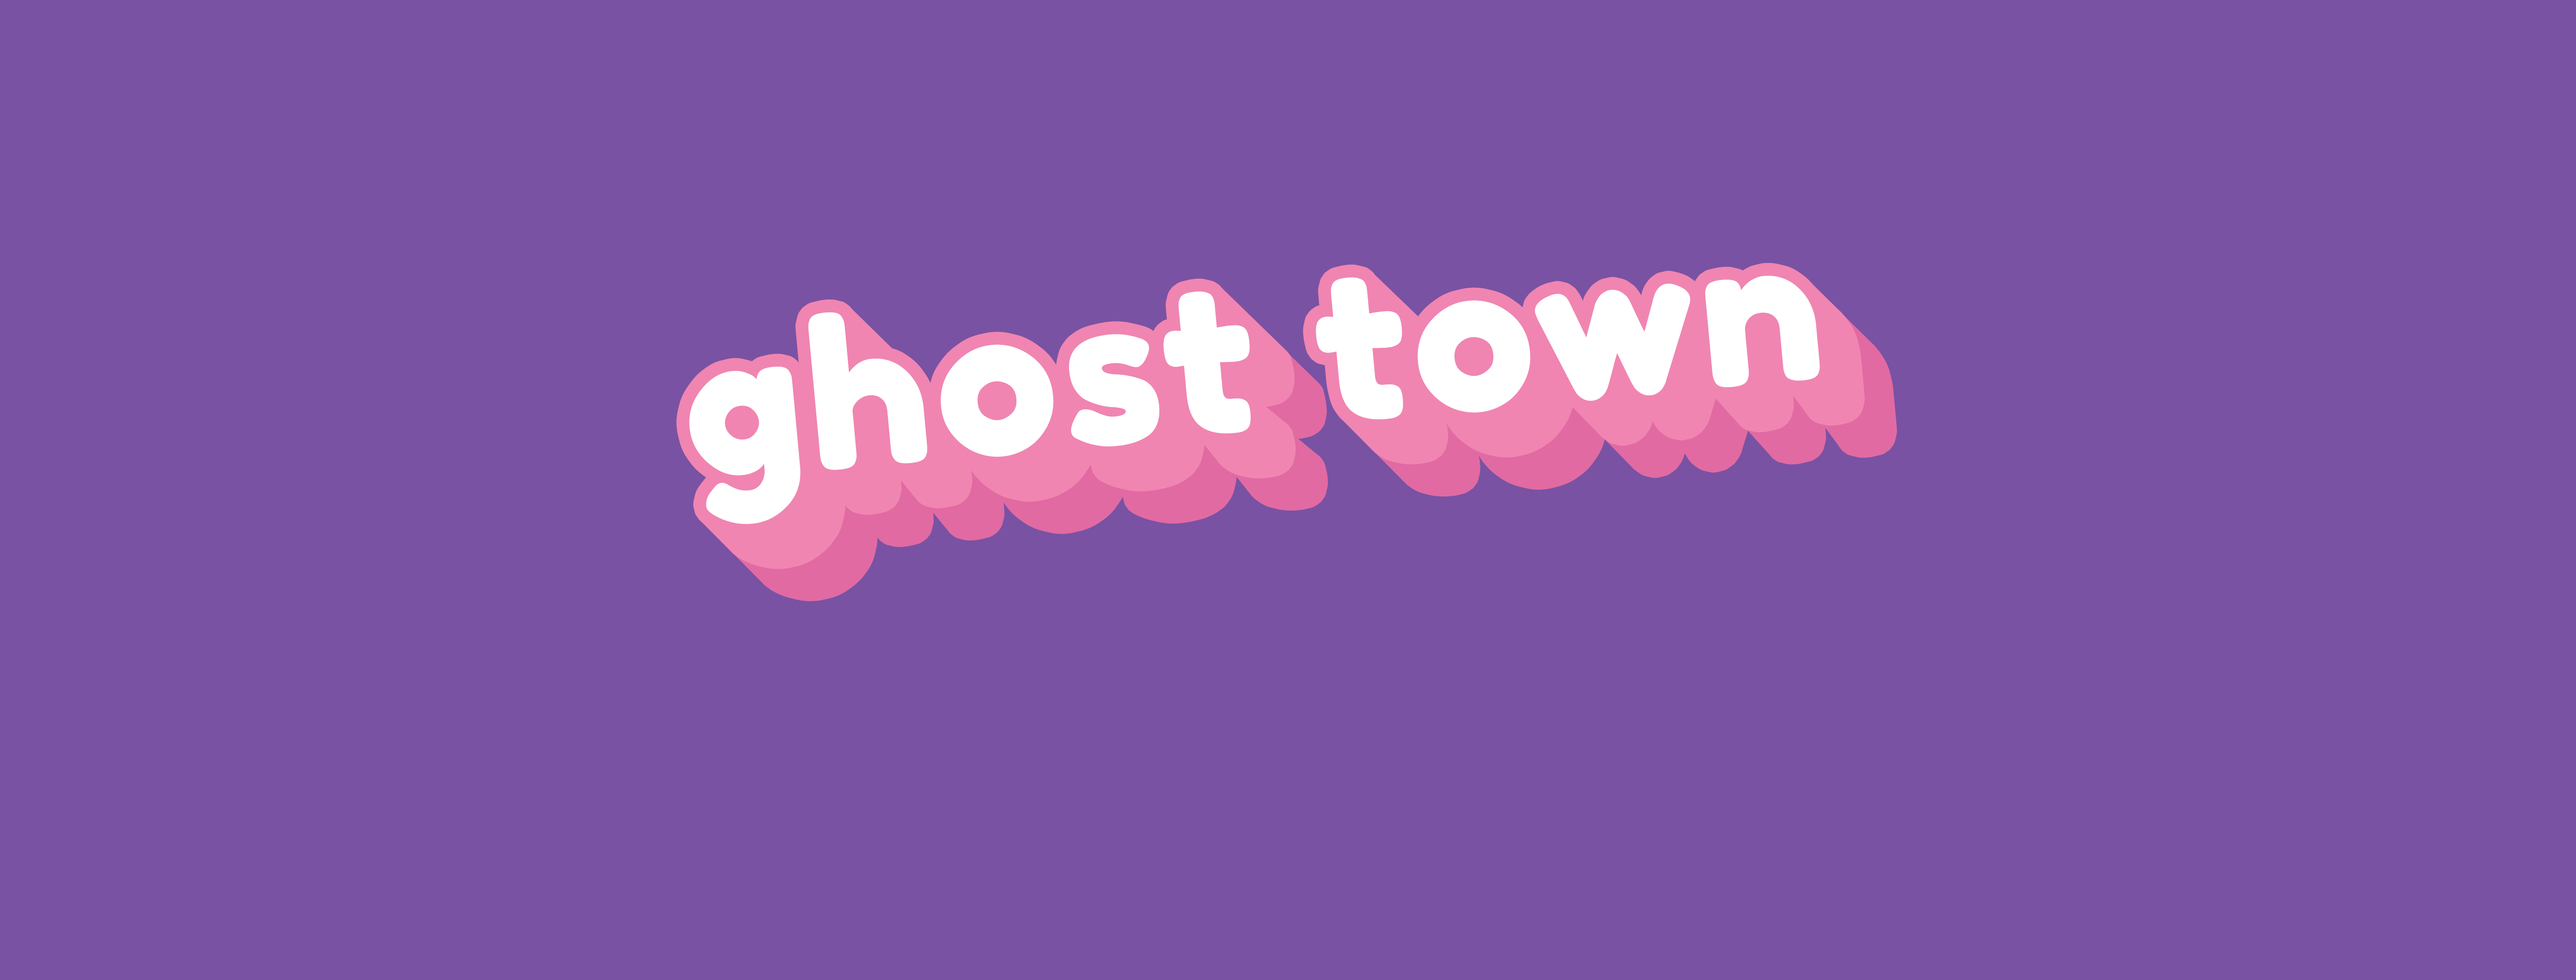 Ghost Town: A Spooky Halloween Story!